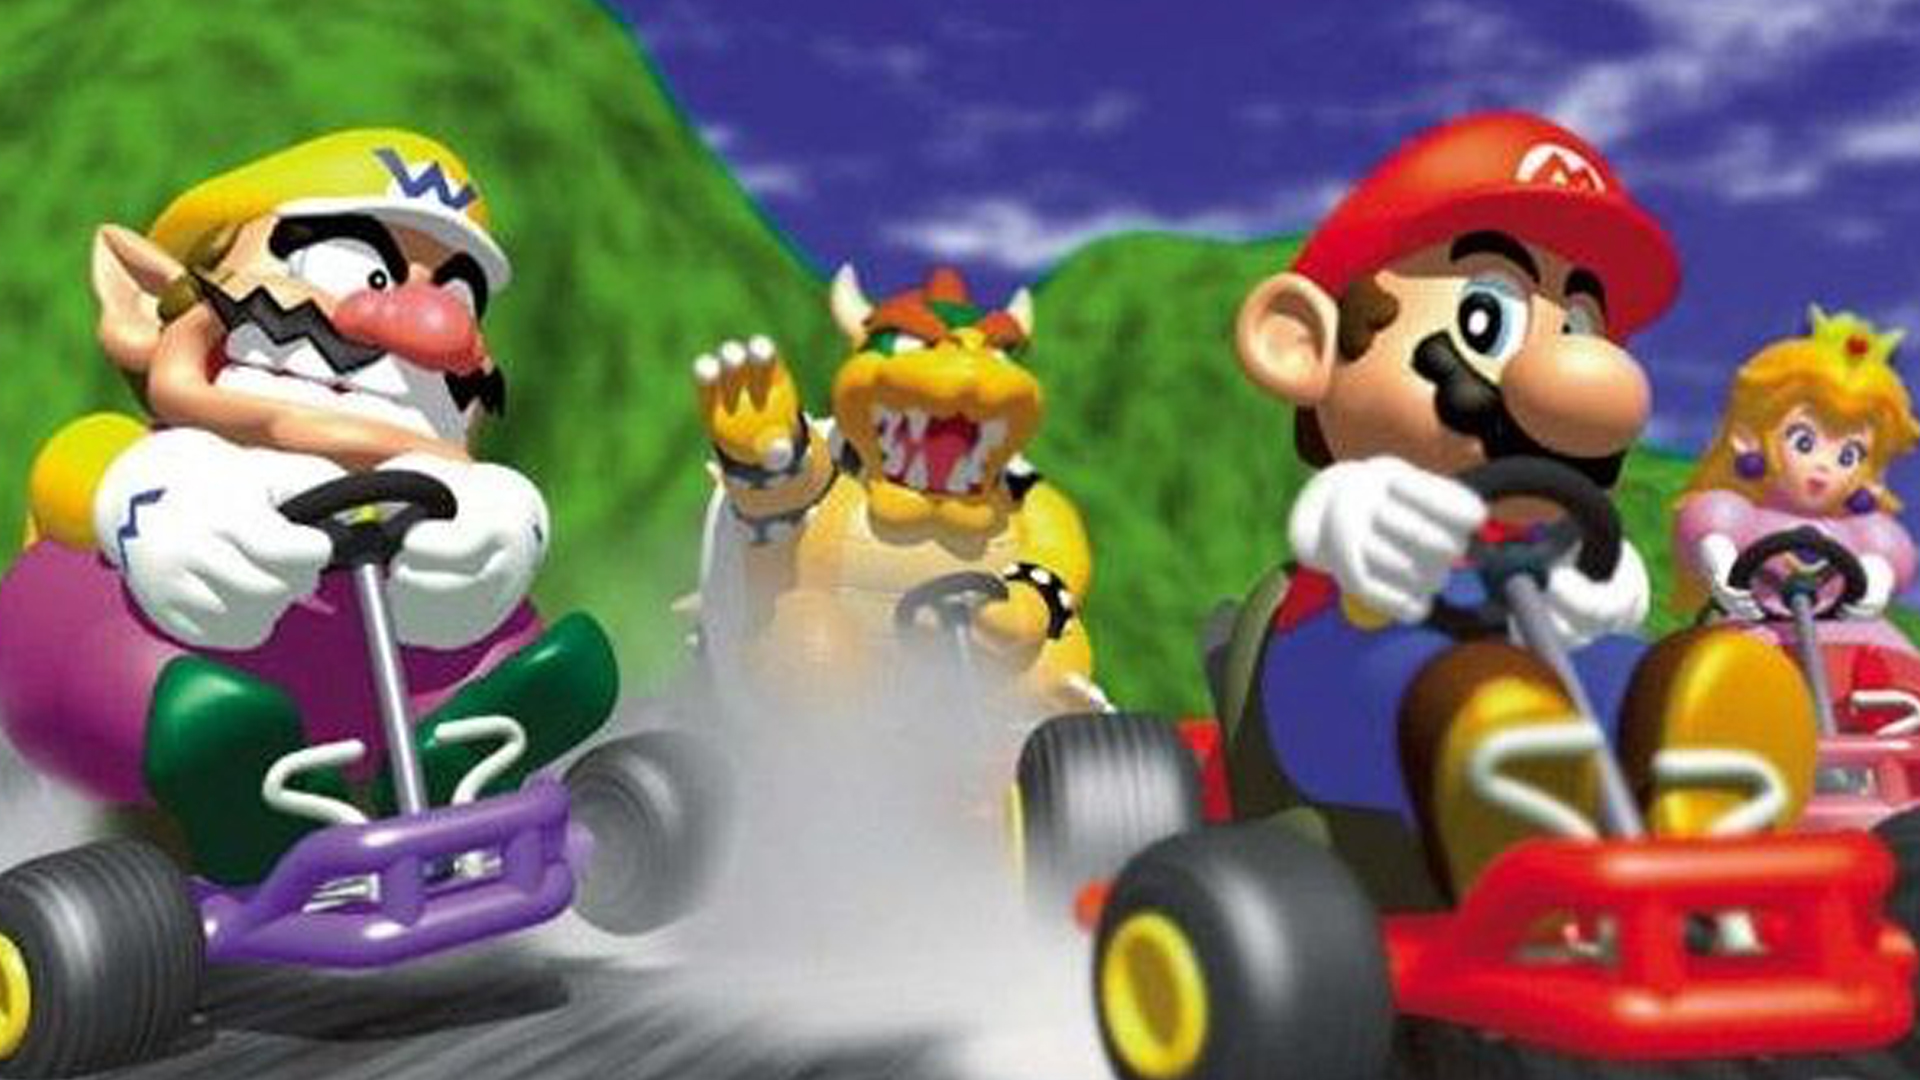 Mario Kart 64's scrapped 'town' track and Super Mario Kart's early sprites discovered